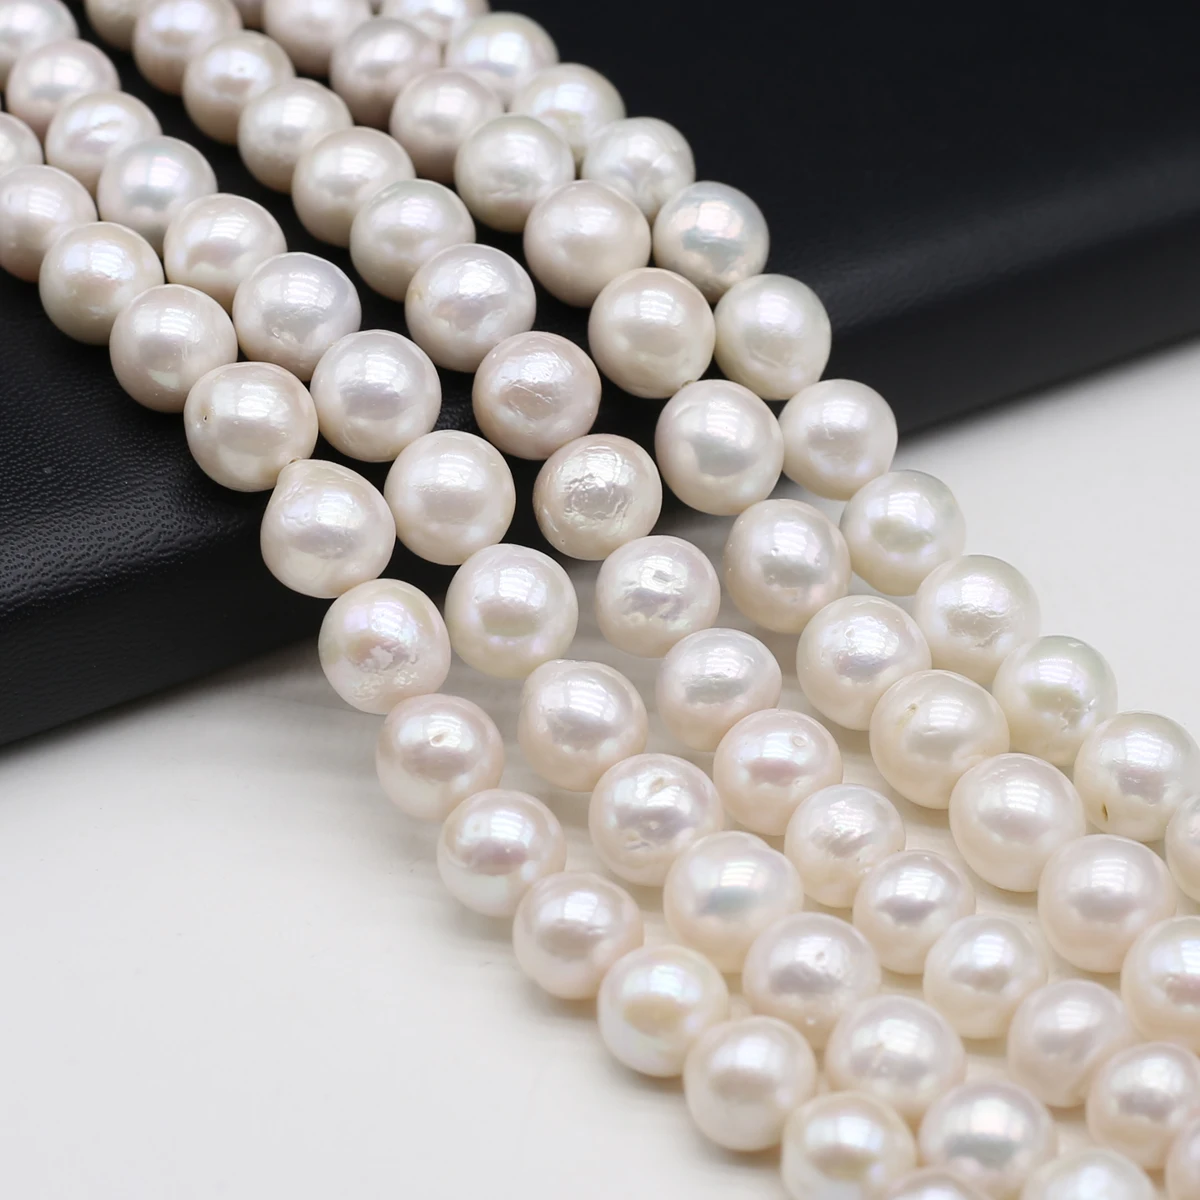 

9-10mm Natural Freshwater Pearl Rourd Beads White Pearl Loose Spacer Beads For Jewelry Making DIY Bracelet Necklace Women Gift